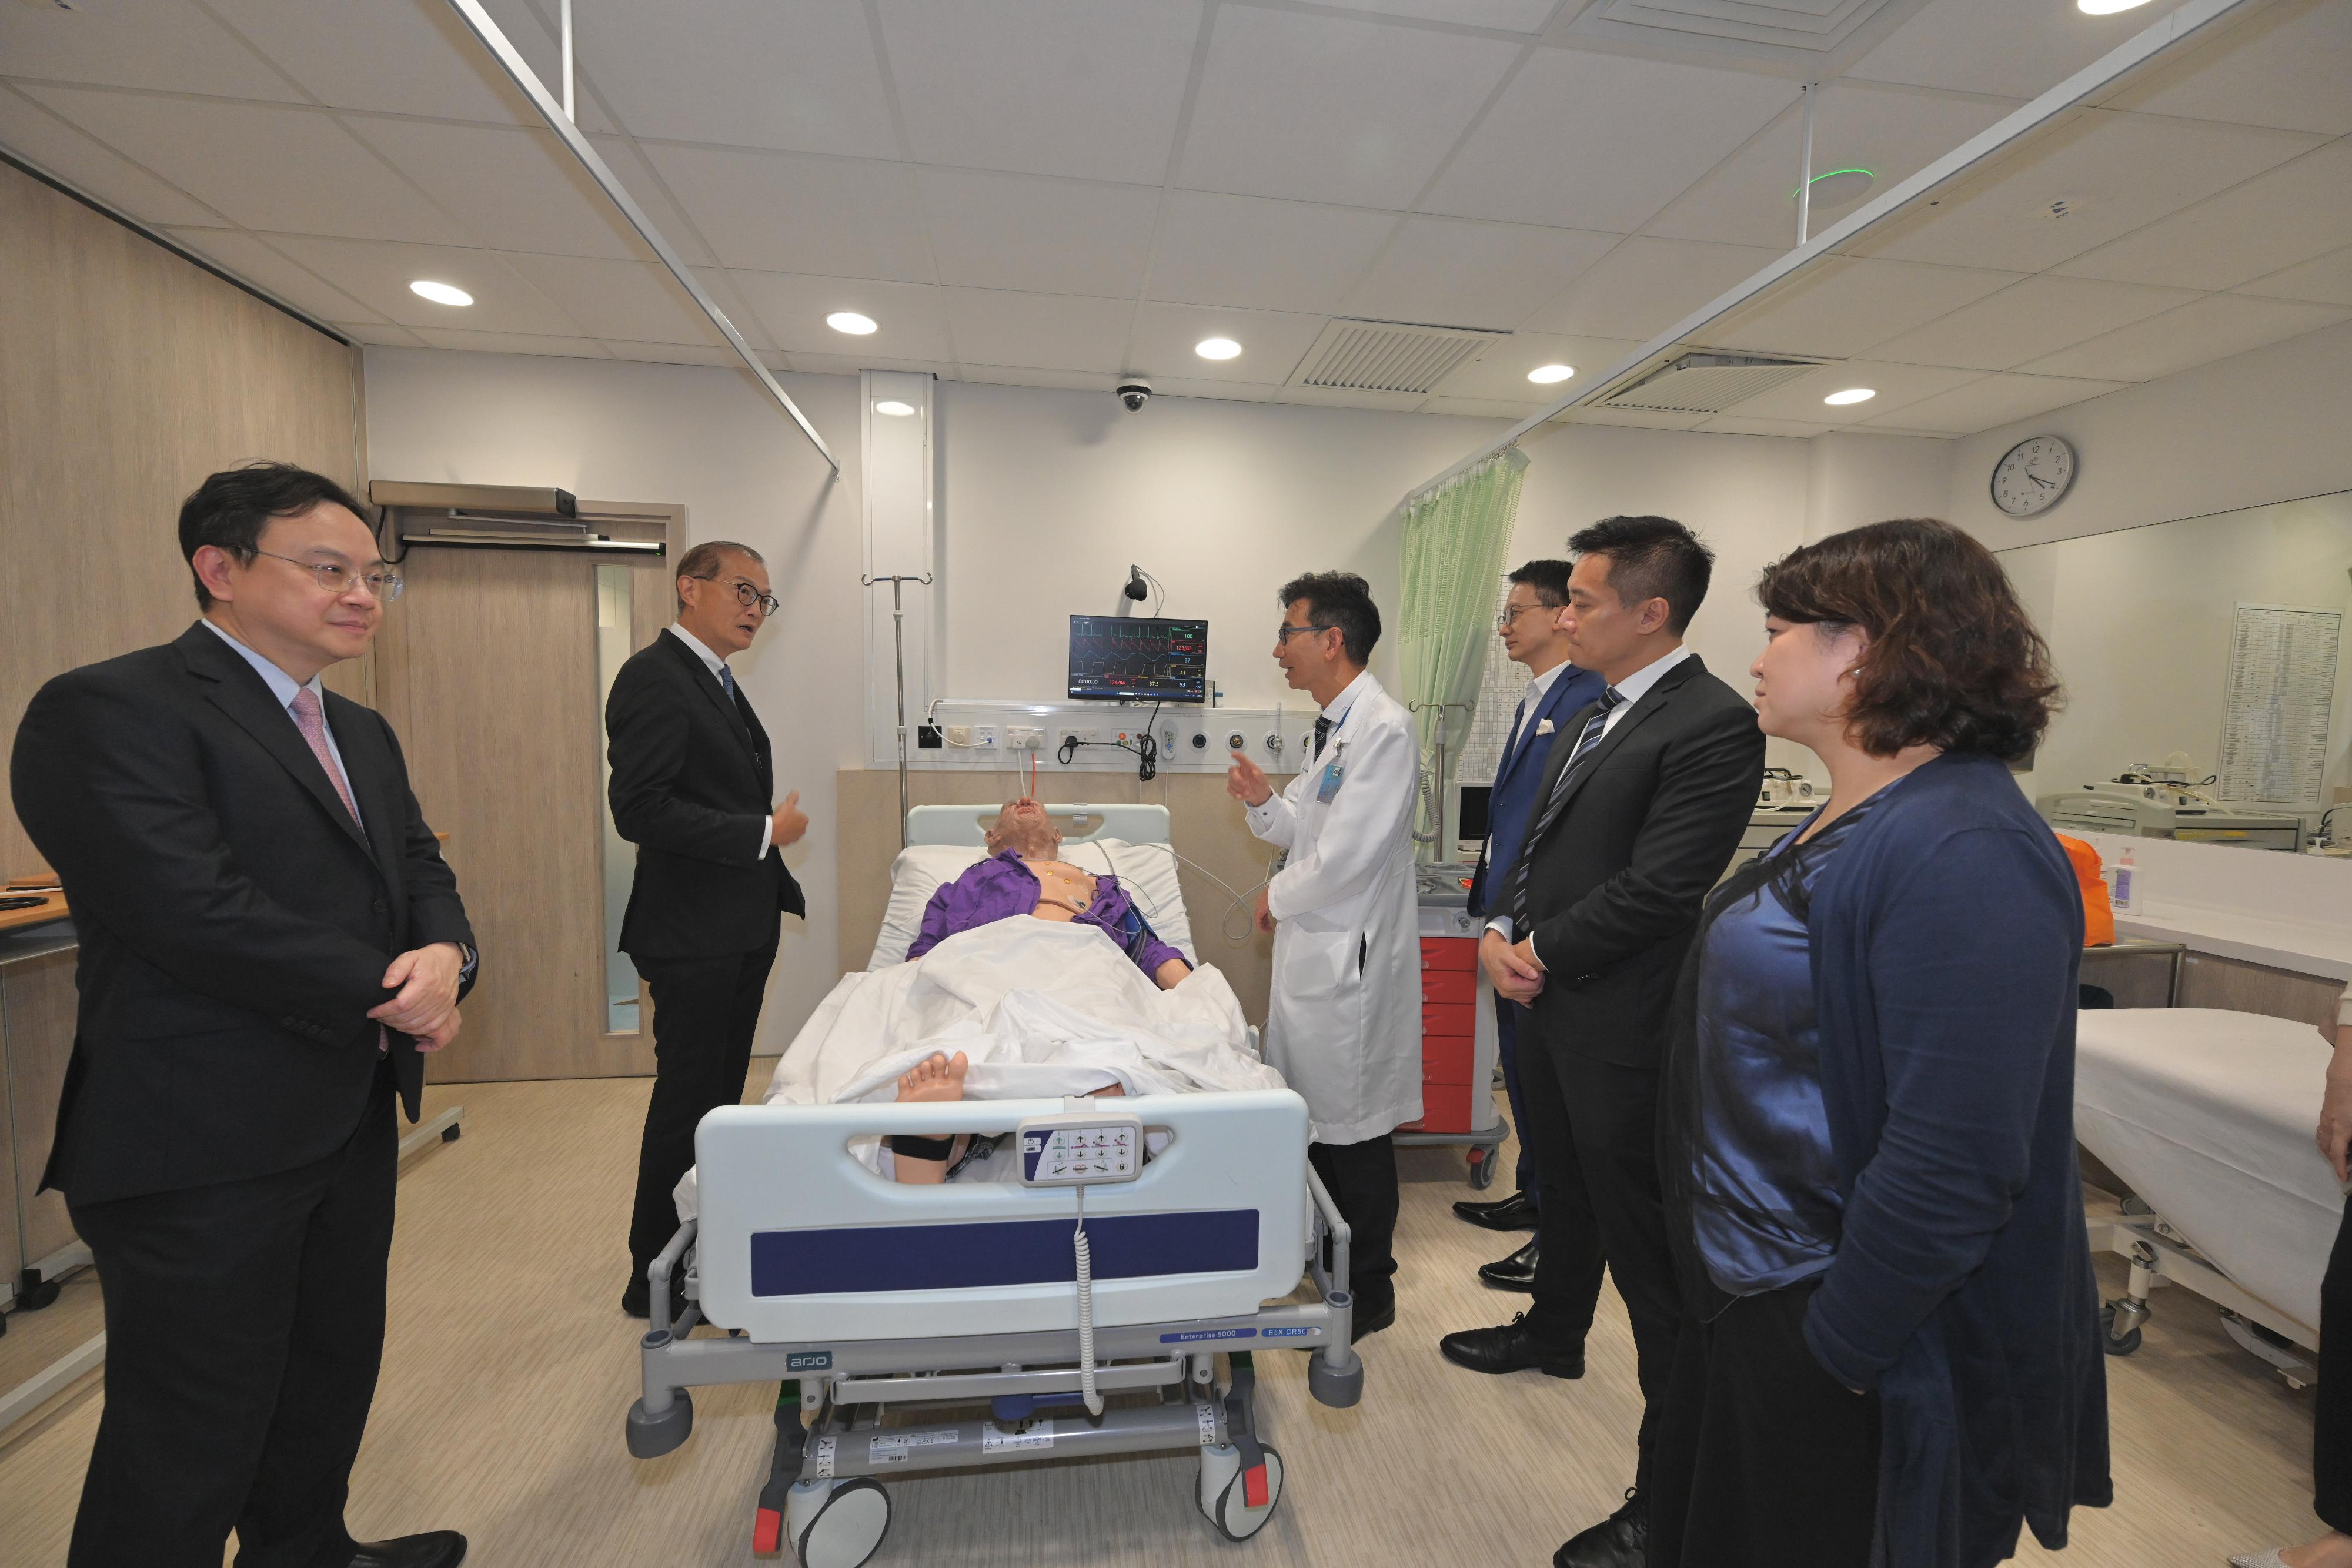 The Secretary for Health, Professor Lo Chung-mau, visited the Faculty of Medicine of the Chinese University of Hong Kong today (September 21). Photo shows Professor Lo (second left) and the Under Secretary for Health, Dr Libby Lee (first right), visiting the Kai Chong Tong Clinical Skills Learning Centre situated at Prince of Wales Hospital to get a better grasp of clinical skills teaching.